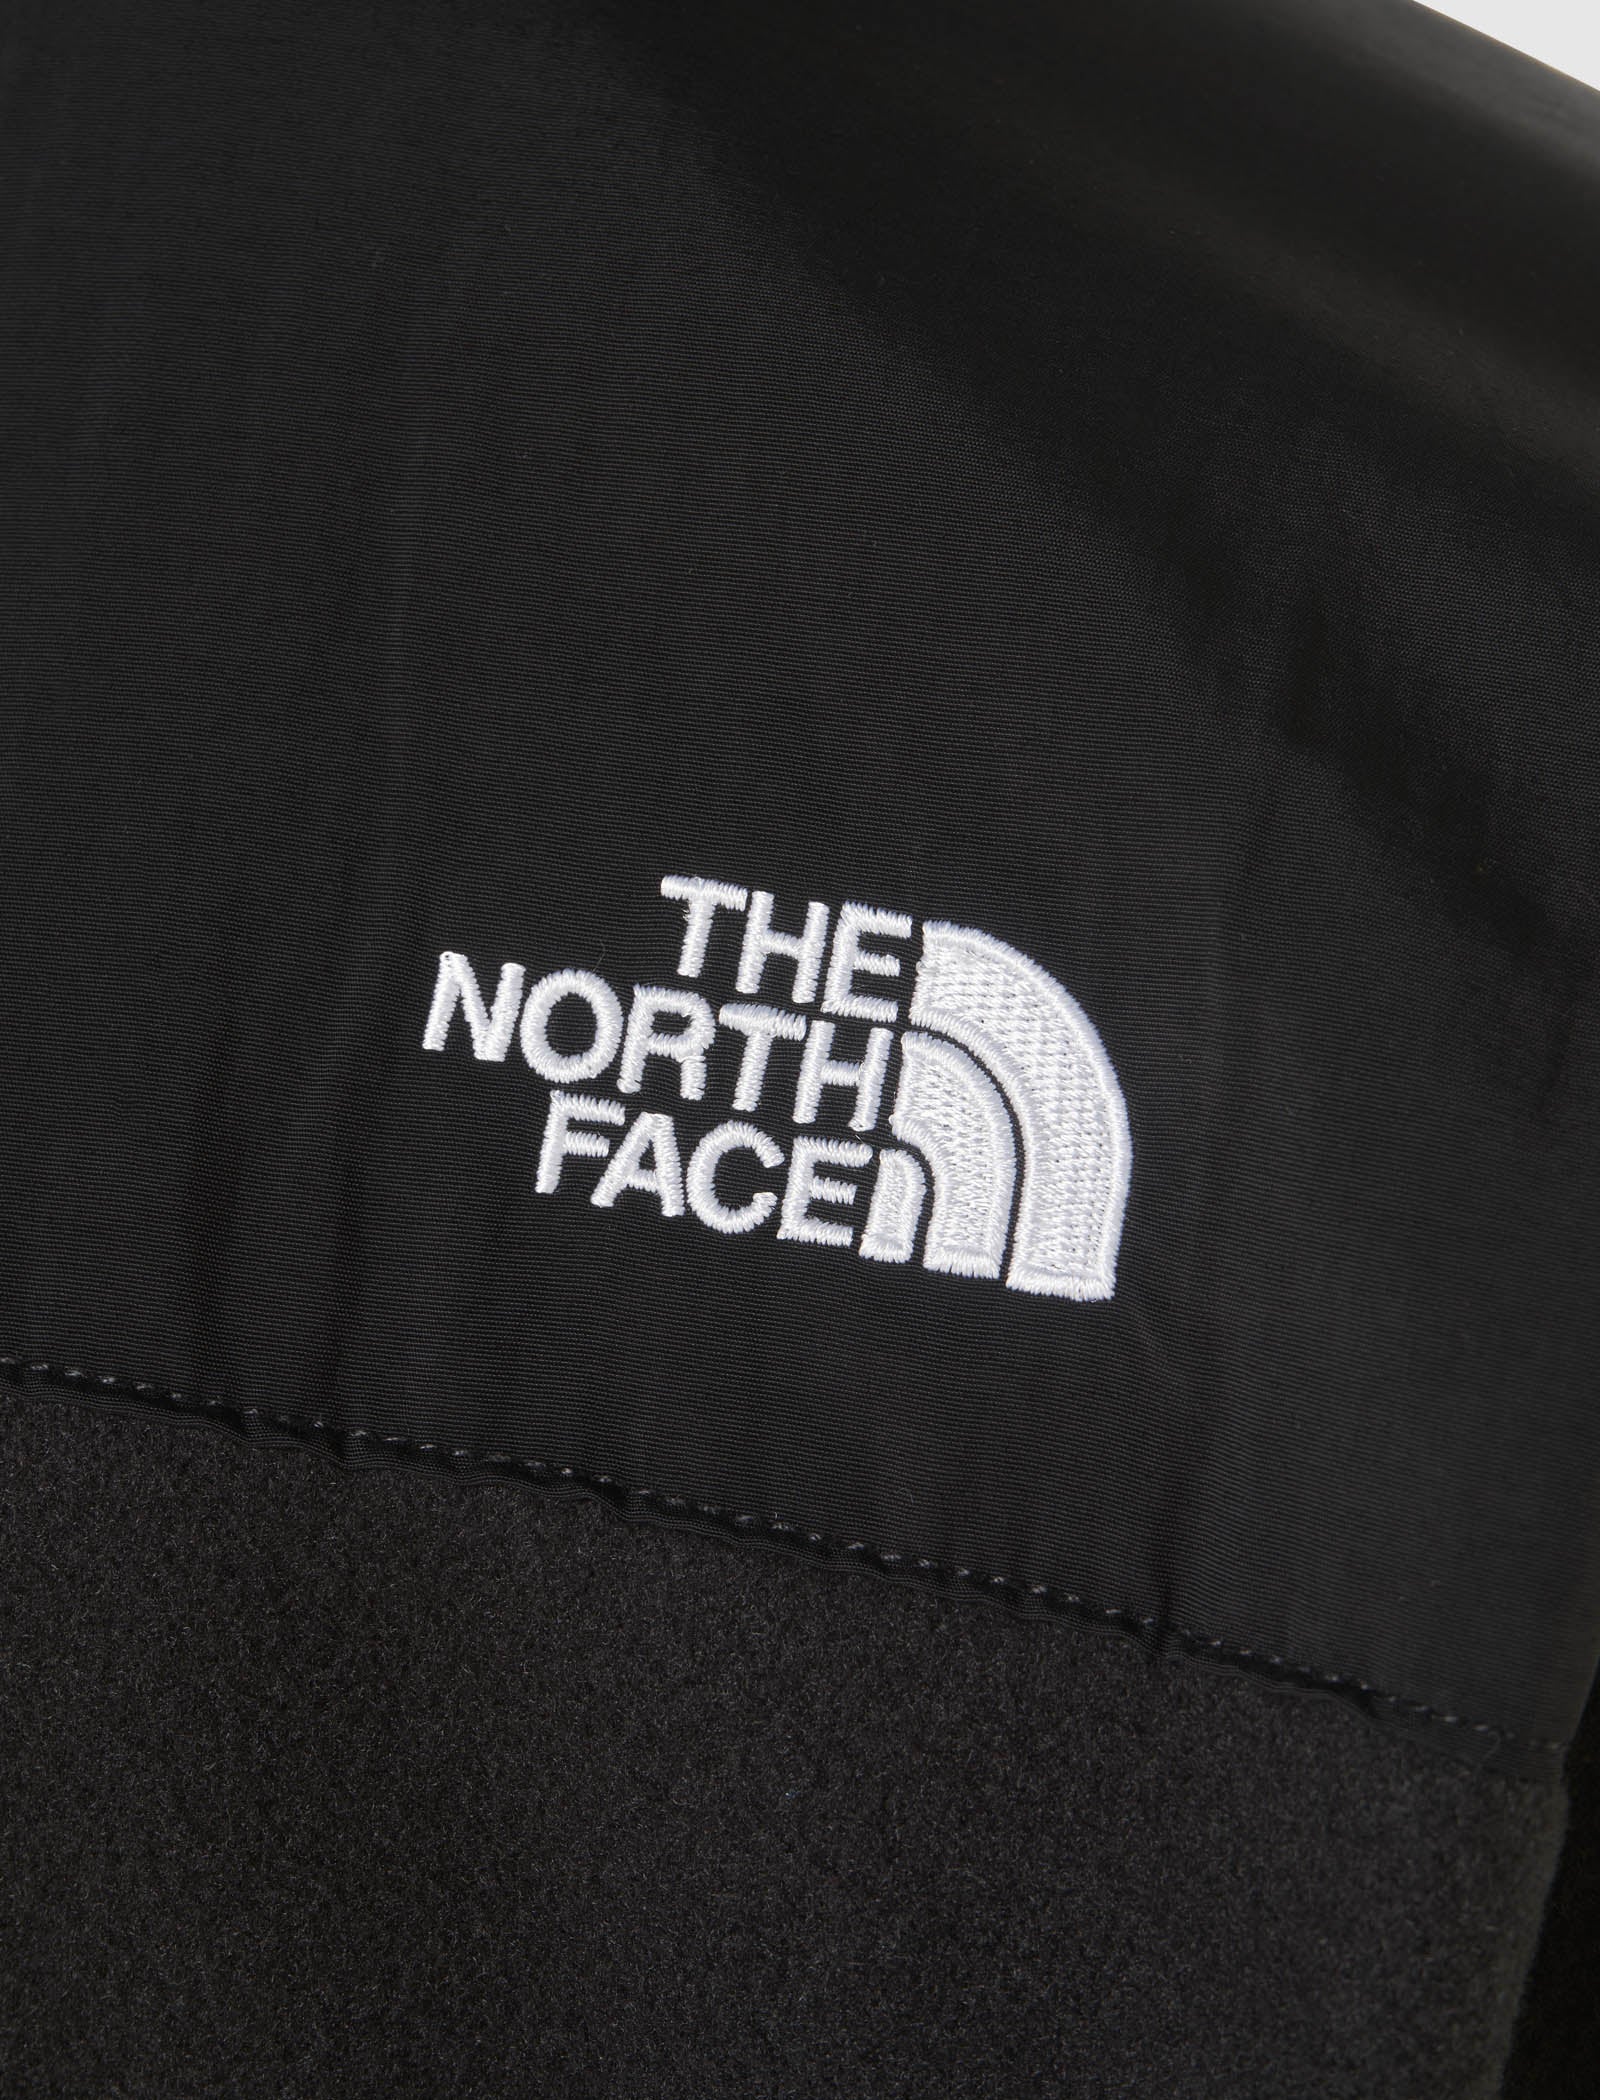 THE NORTH FACE DEN JACKET